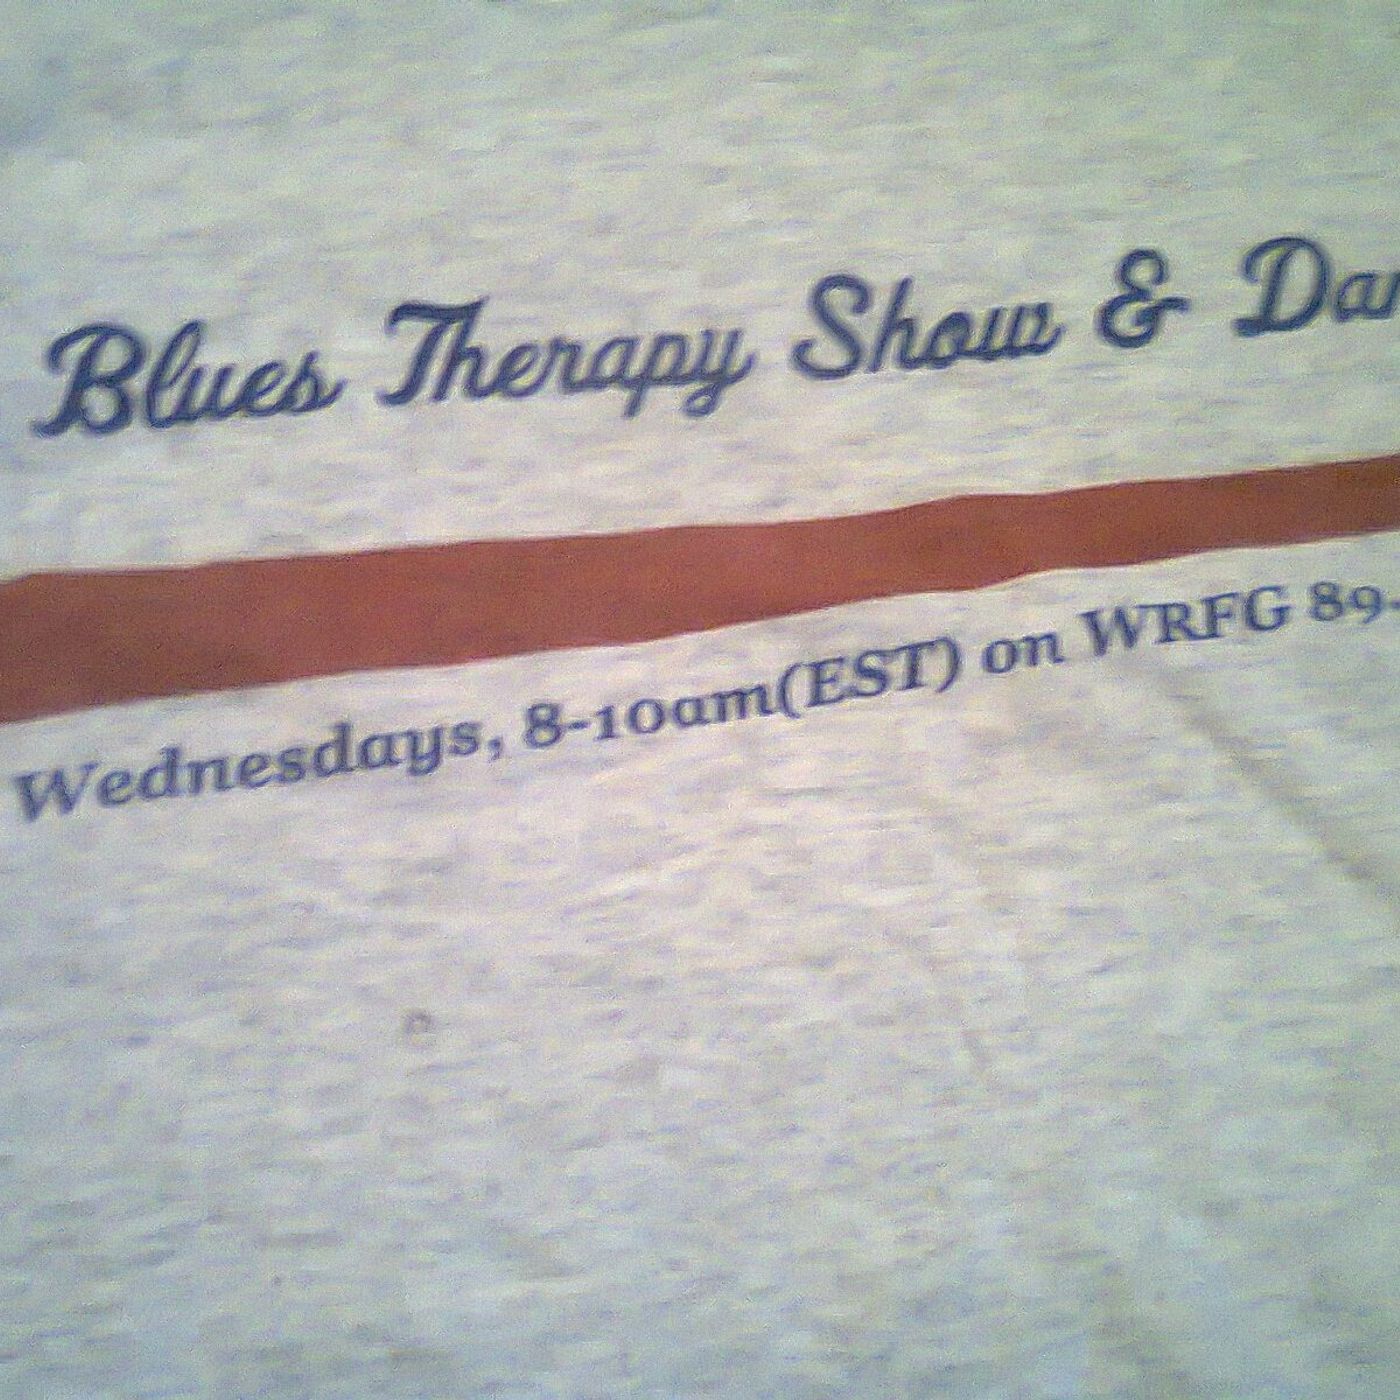 The Blues Therapy Show & Dance's show